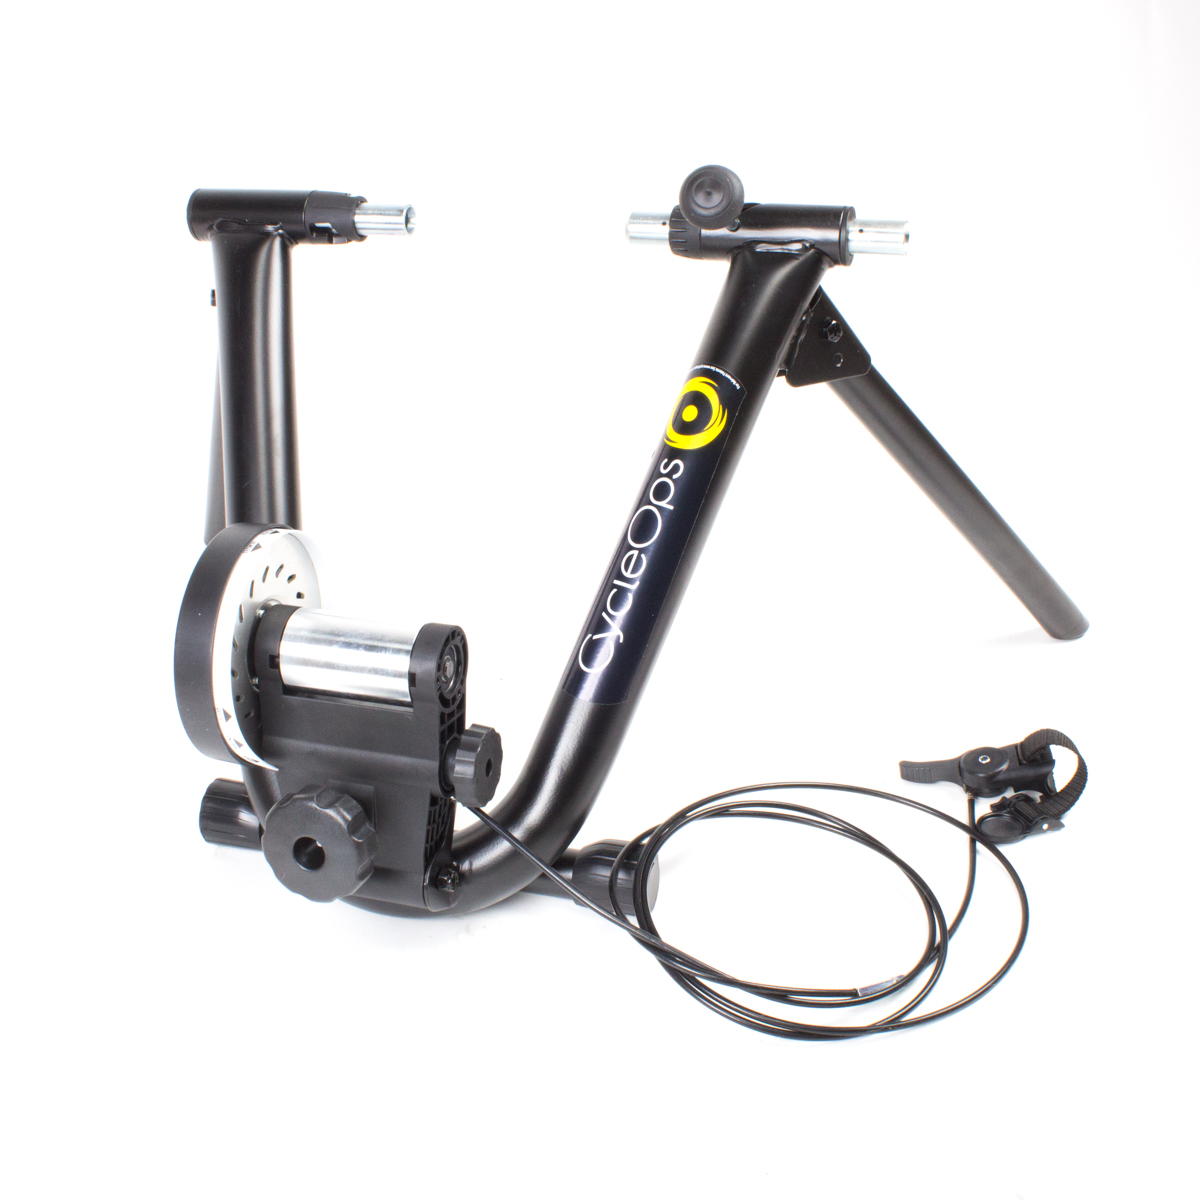 CycleOps Mag+ Indoor Cycling Trainer with Remote 695638323746 | eBay